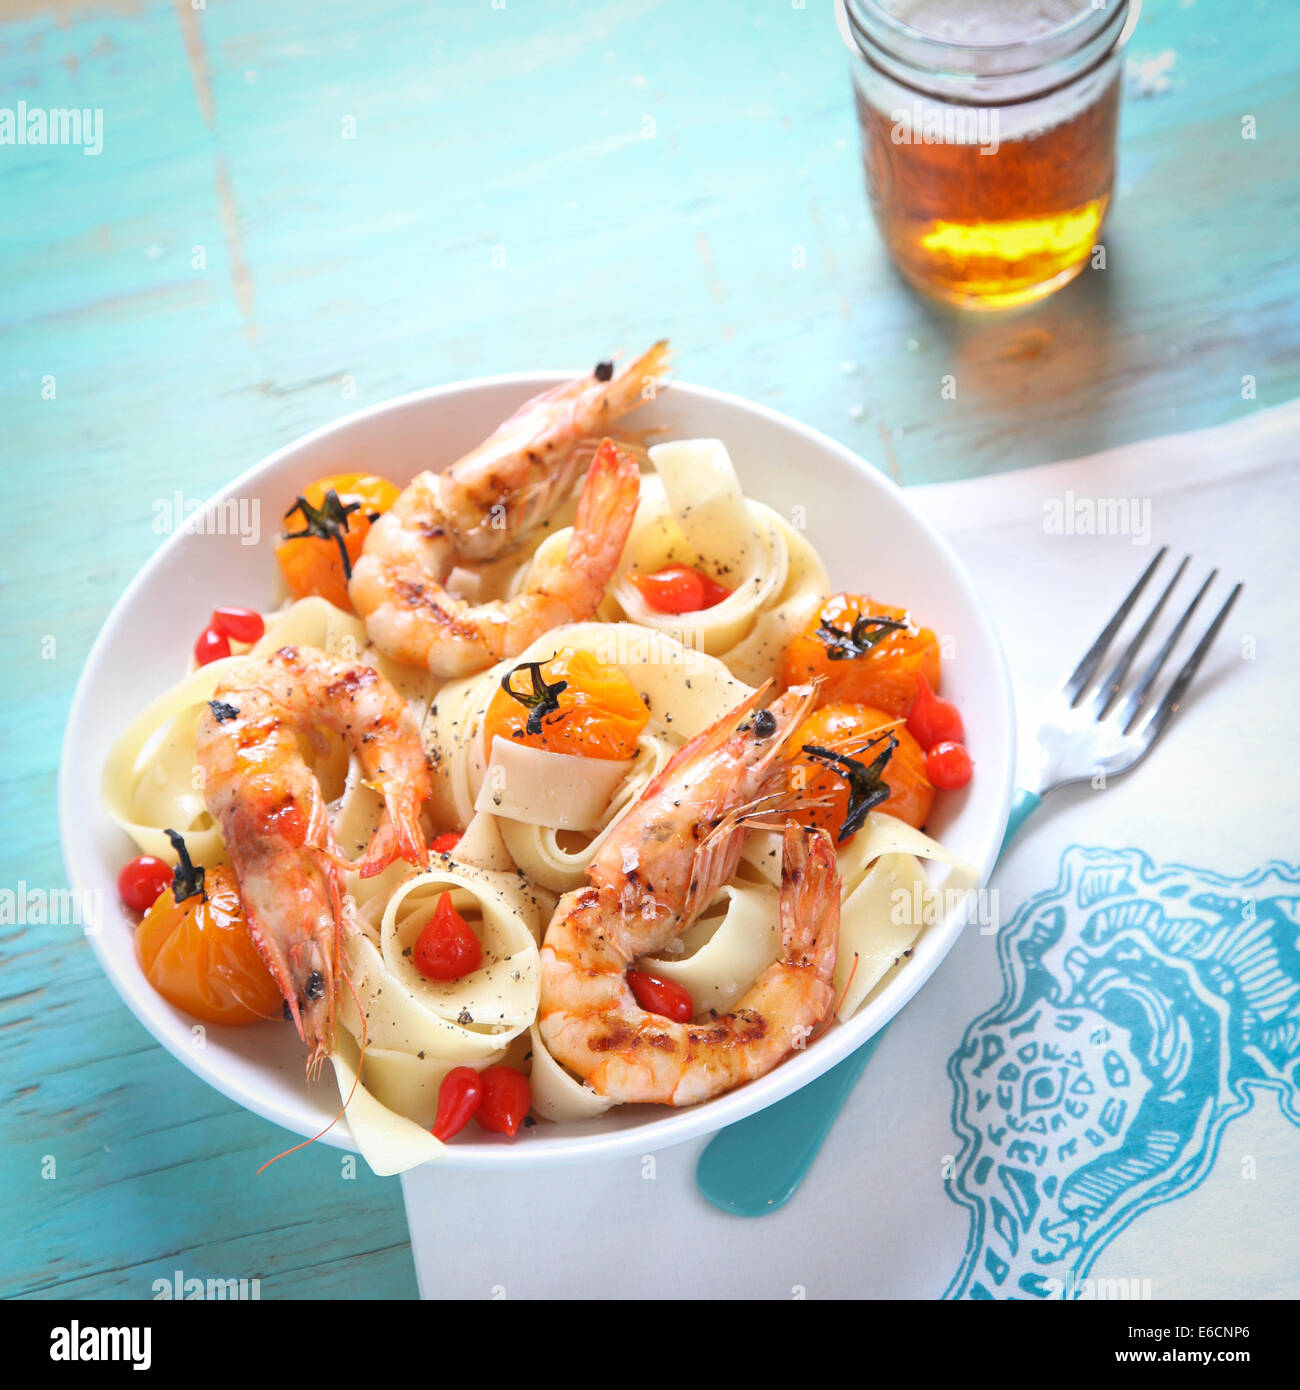 Prawn, tomato, and papardelle pasta with beer Stock Photo